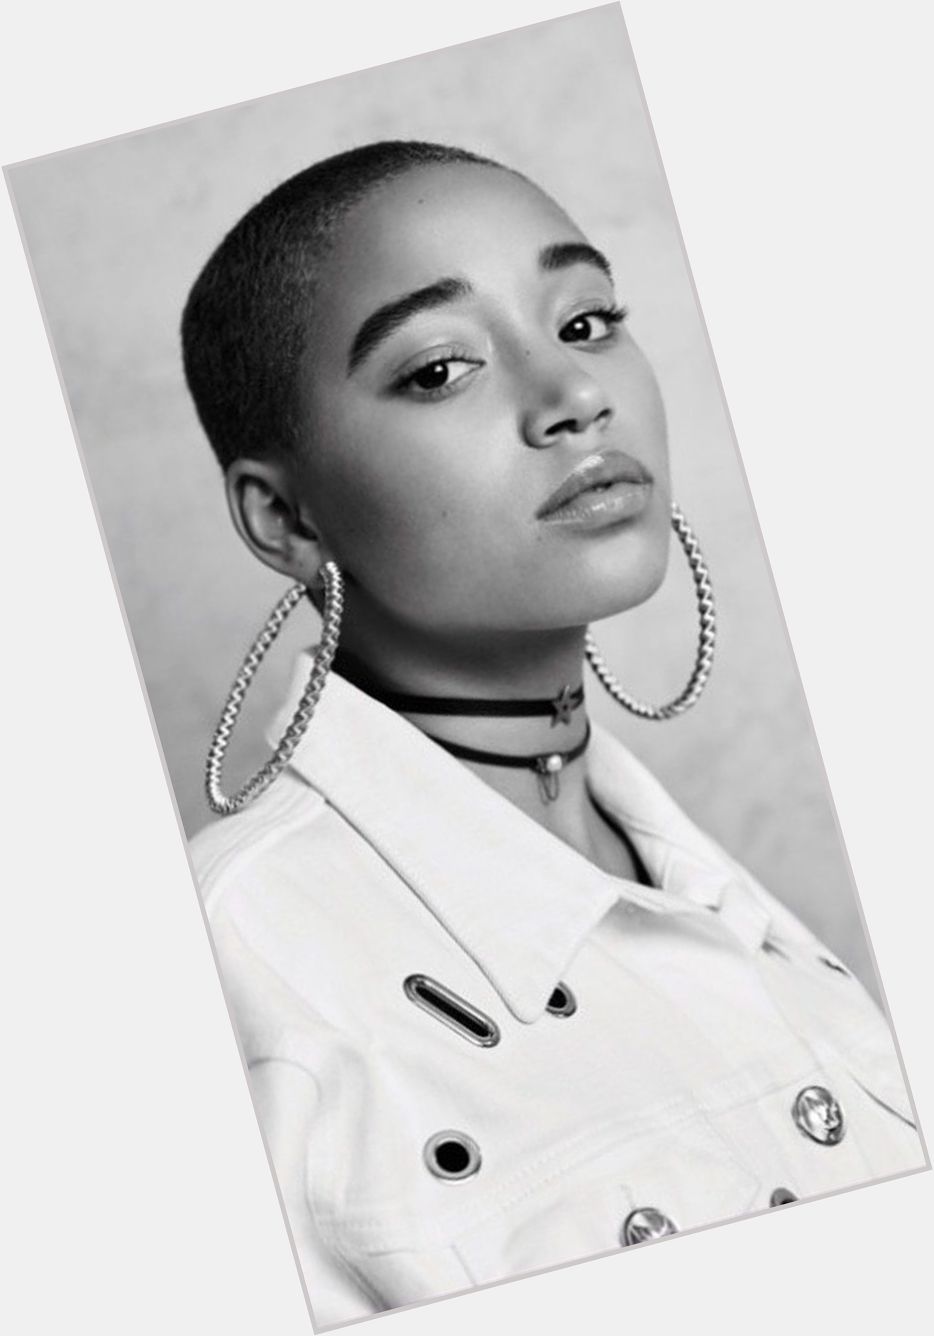 Happy Birthday Amandla Stenberg!
The Walker Collective - A Law Firm For Creatives
 